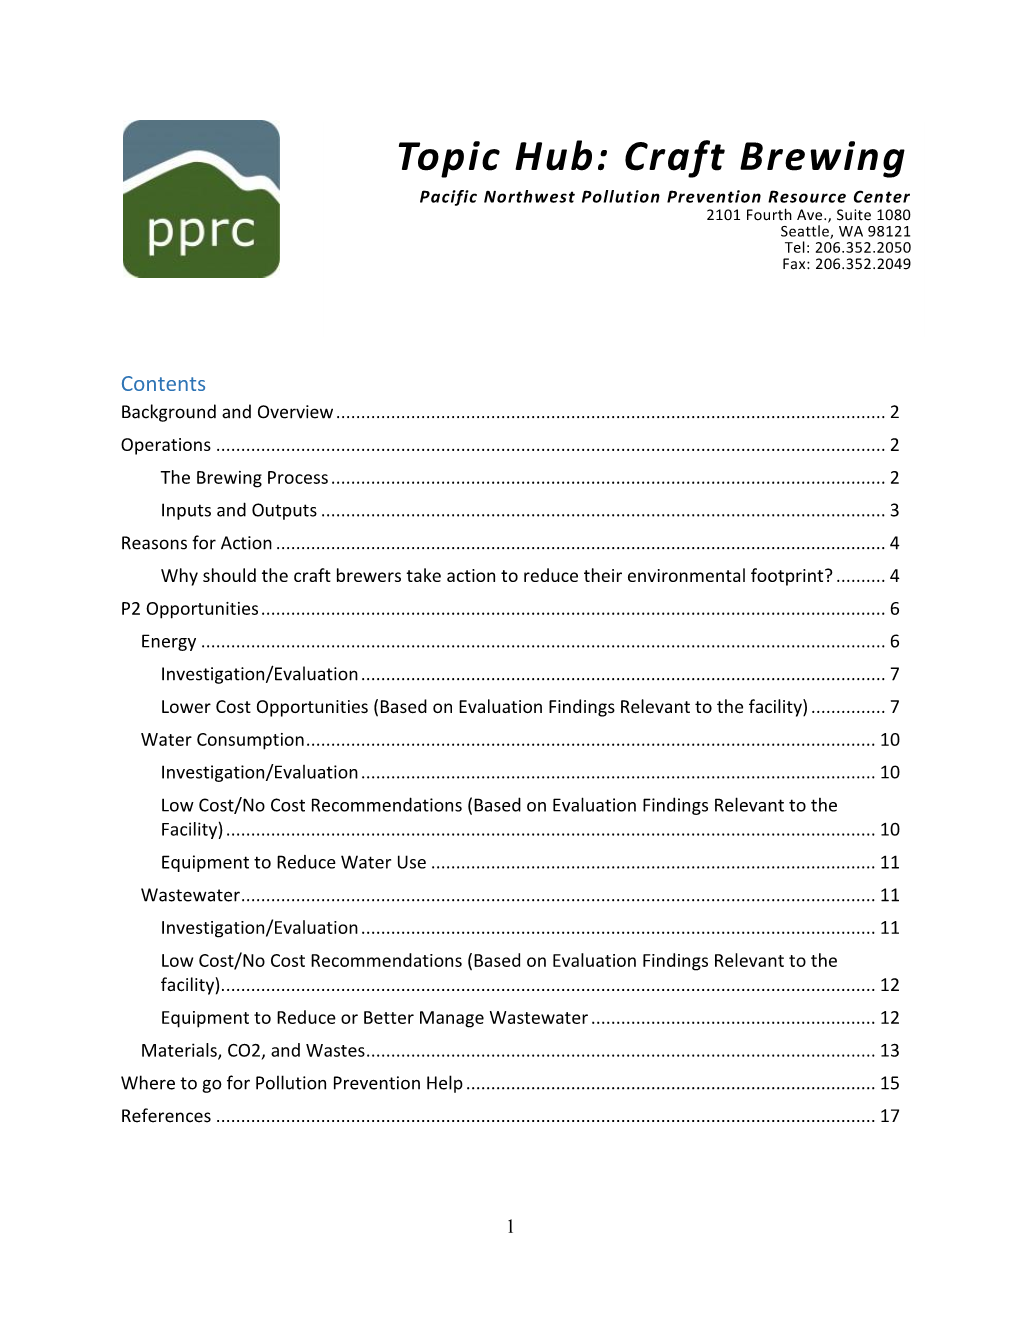 Topic Hub: Craft Brewing Pacific Northwest Pollution Prevention Resource Center 2101 Fourth Ave., Suite 1080 Seattle, WA 98121 Tel: 206.352.2050 Fax: 206.352.2049